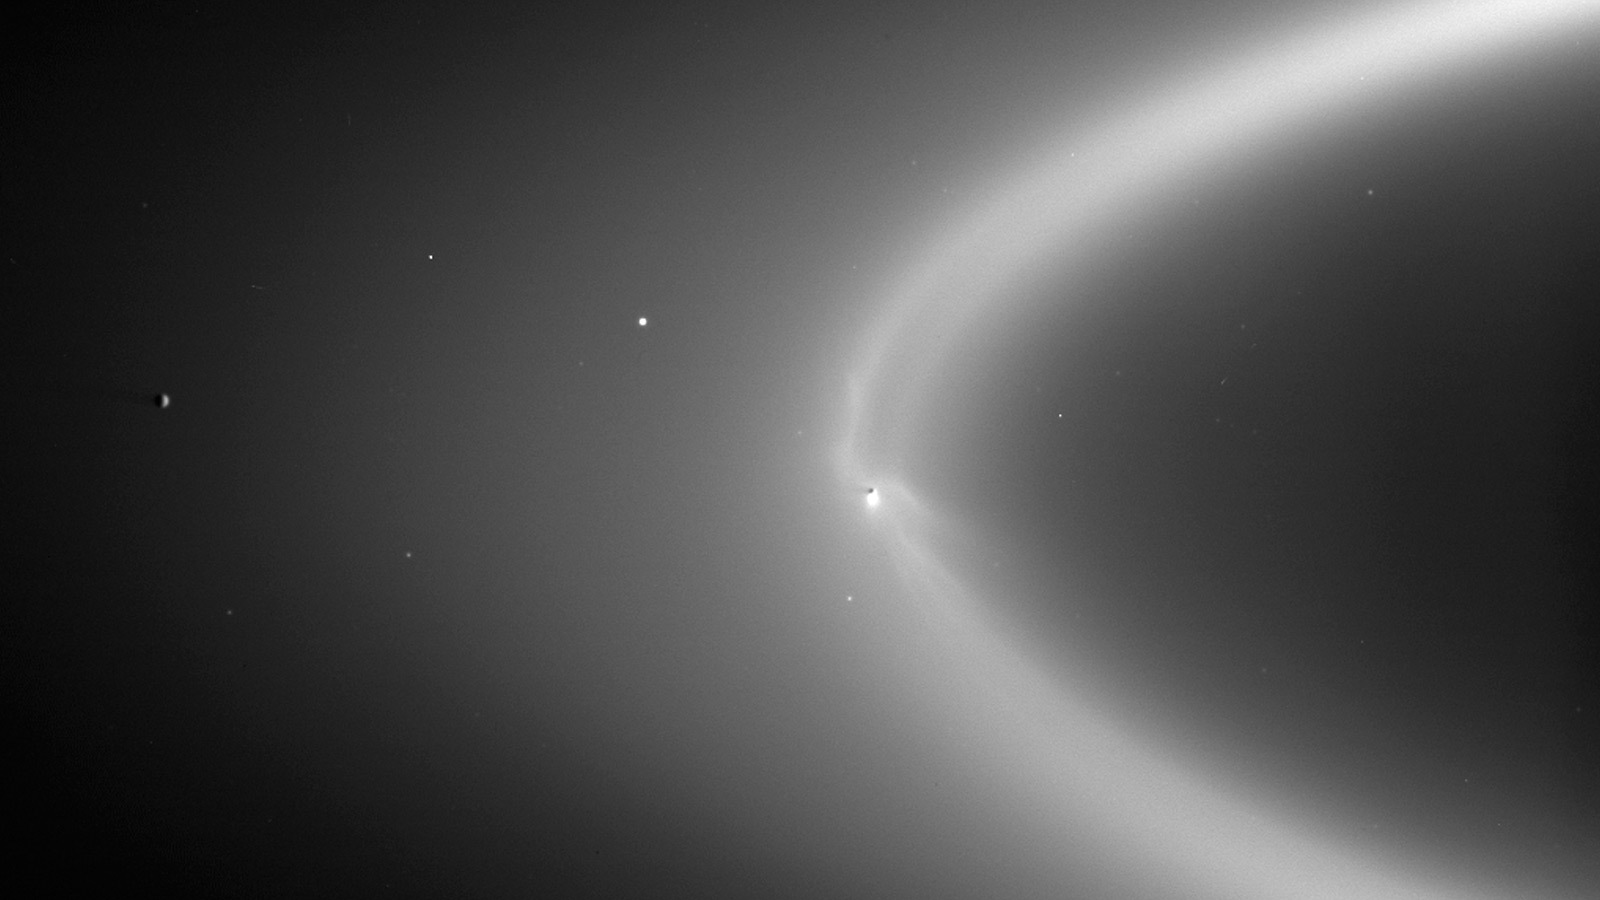 Black and white image of dusty rings at Saturn.